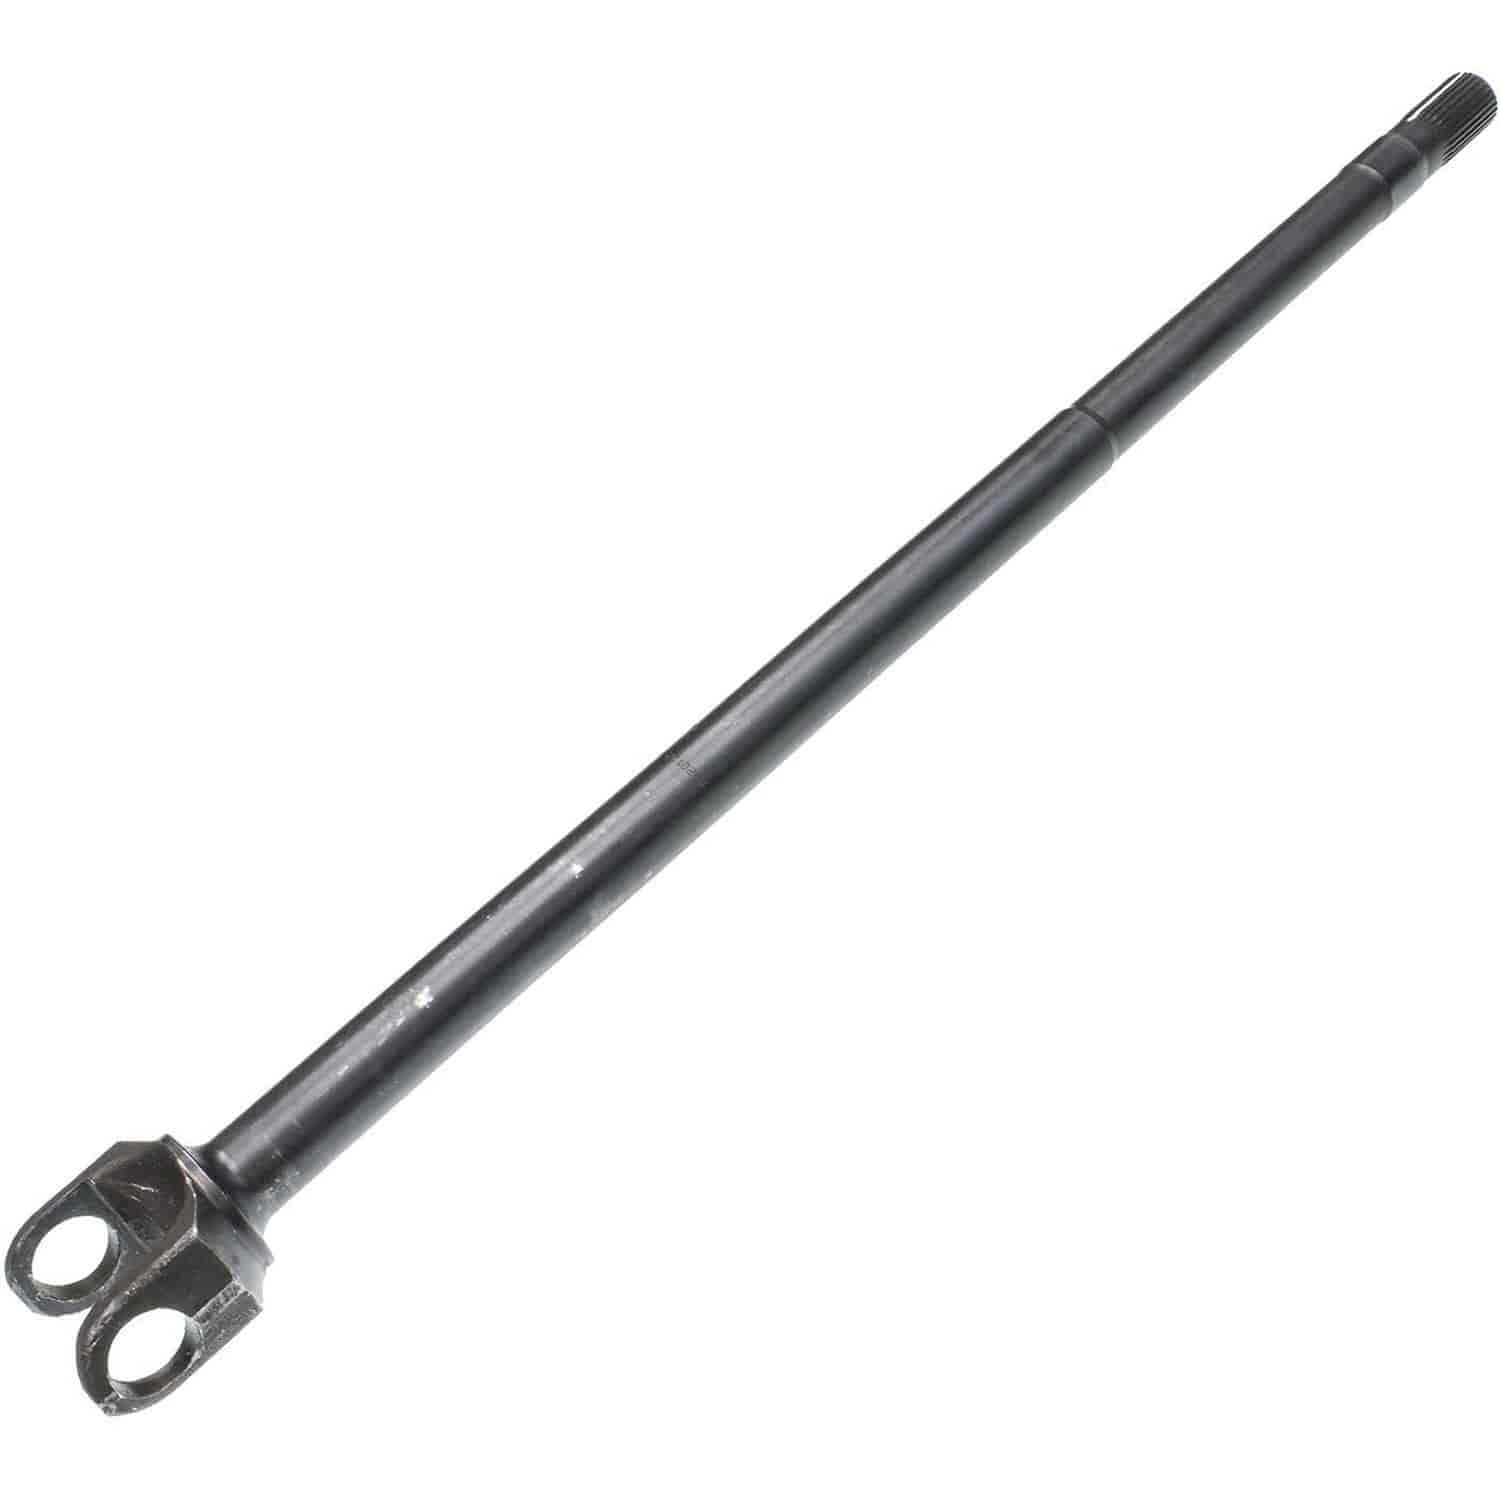 Axle Shaft 33.19 in. Overall Length 30 Spline Black Oxide Badged Under The Ten Factory Product Line